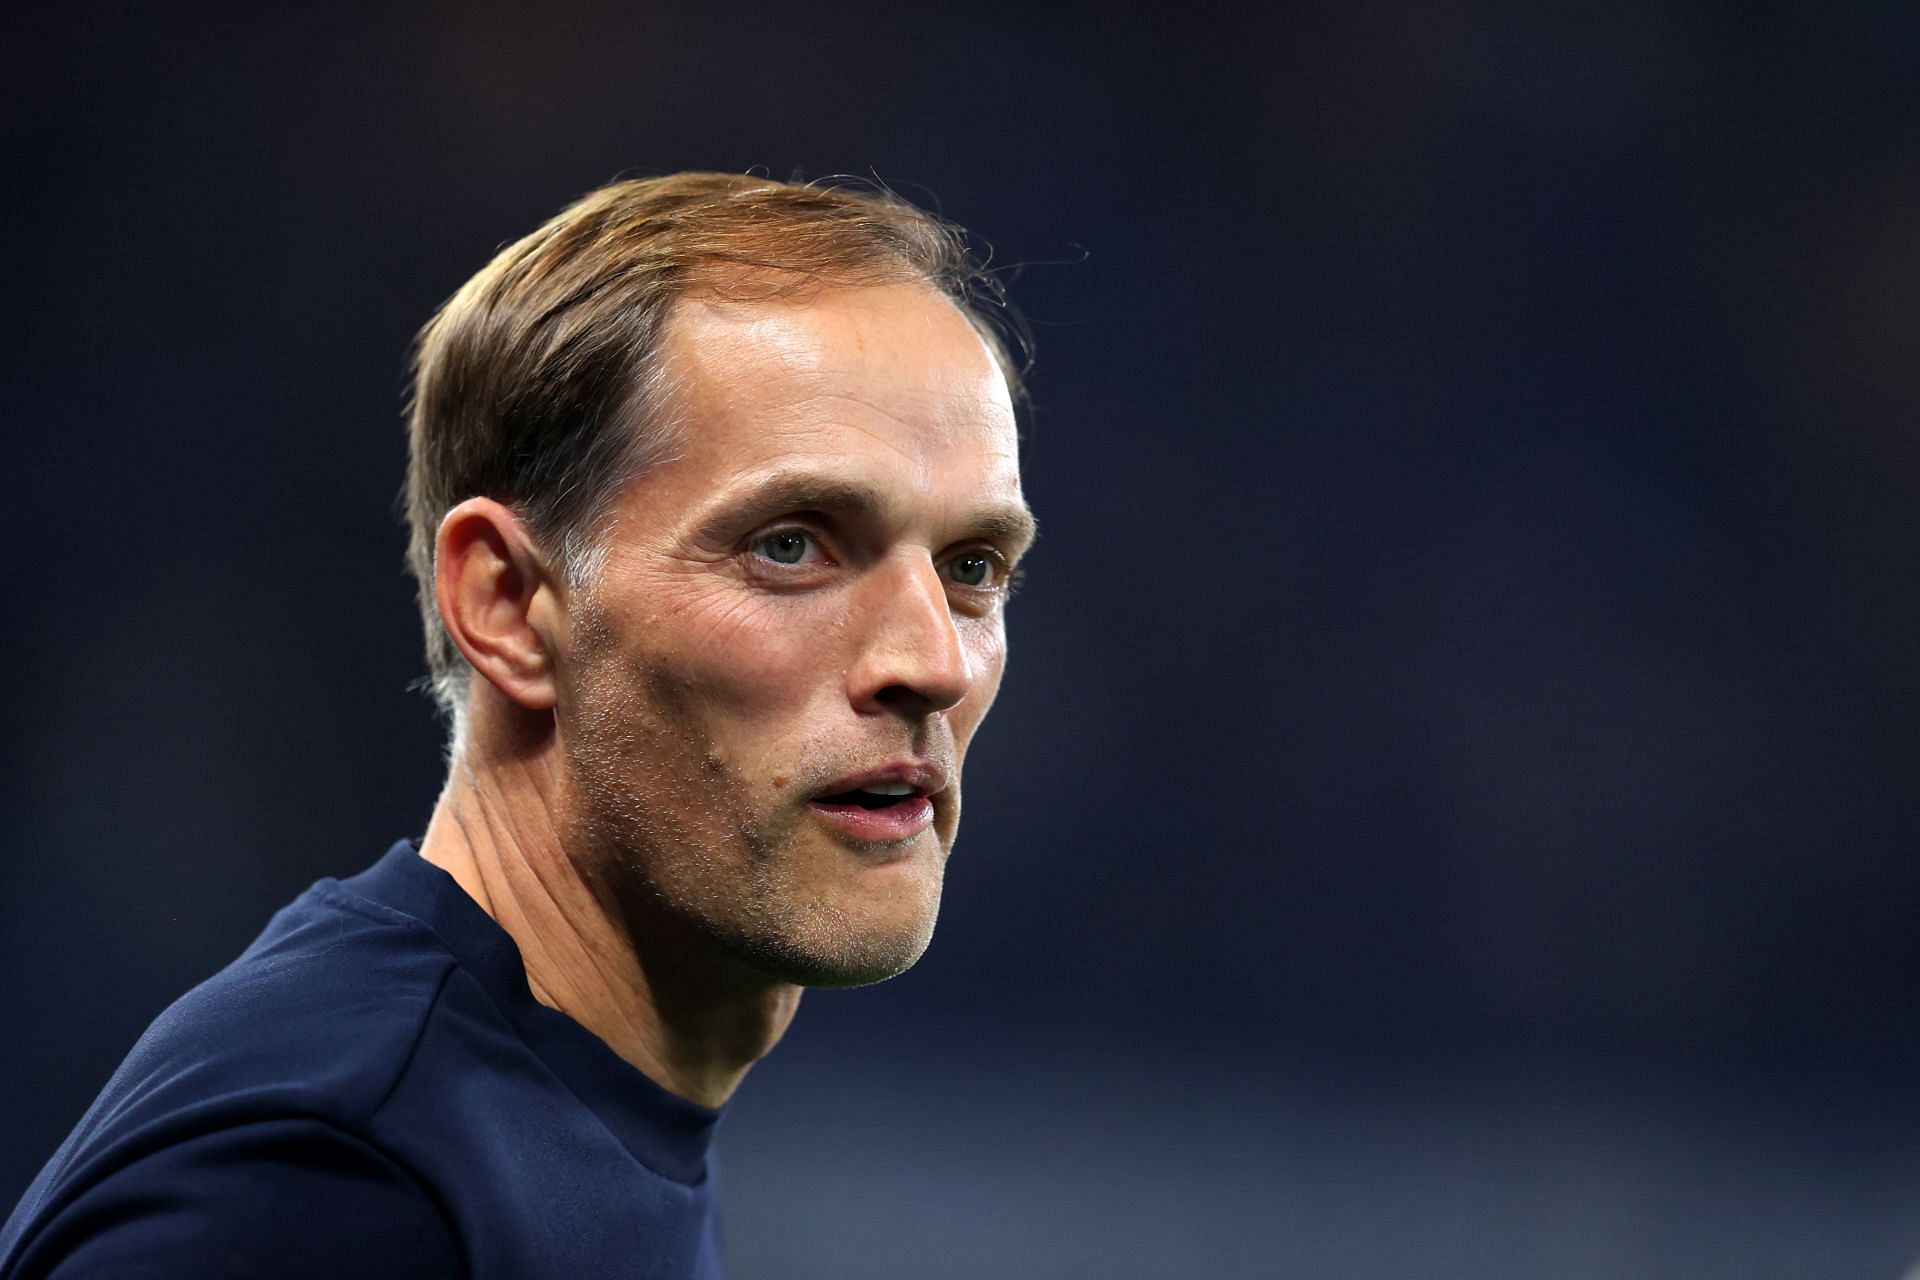 Thomas Tuchel has not yet completed a full season in the Premier League.